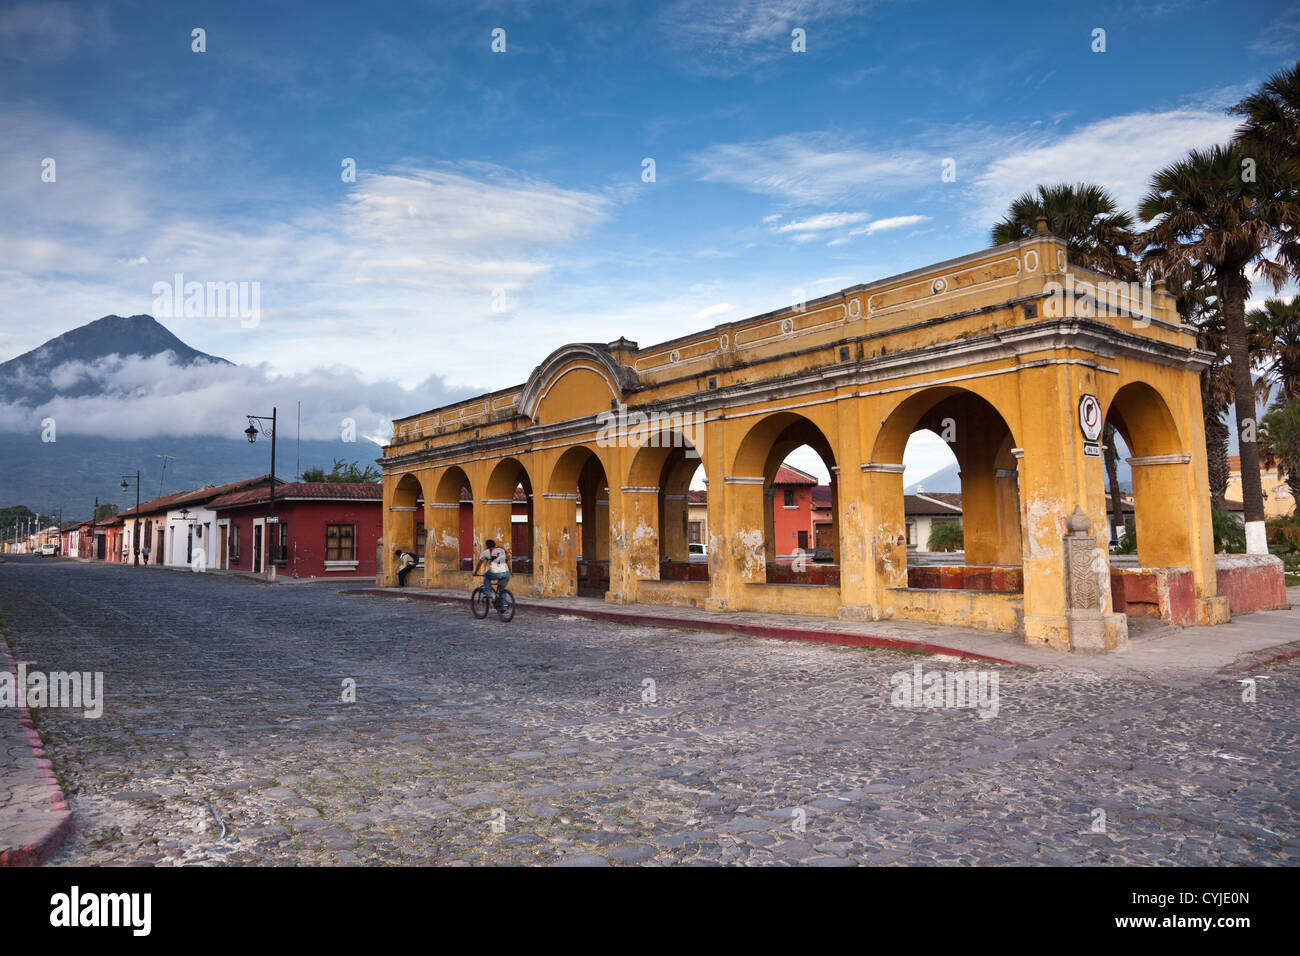 Antigua is a charming world heritage town in Guatemala filled with gorgeous old architecture and cobblestone streets. Stock Photo